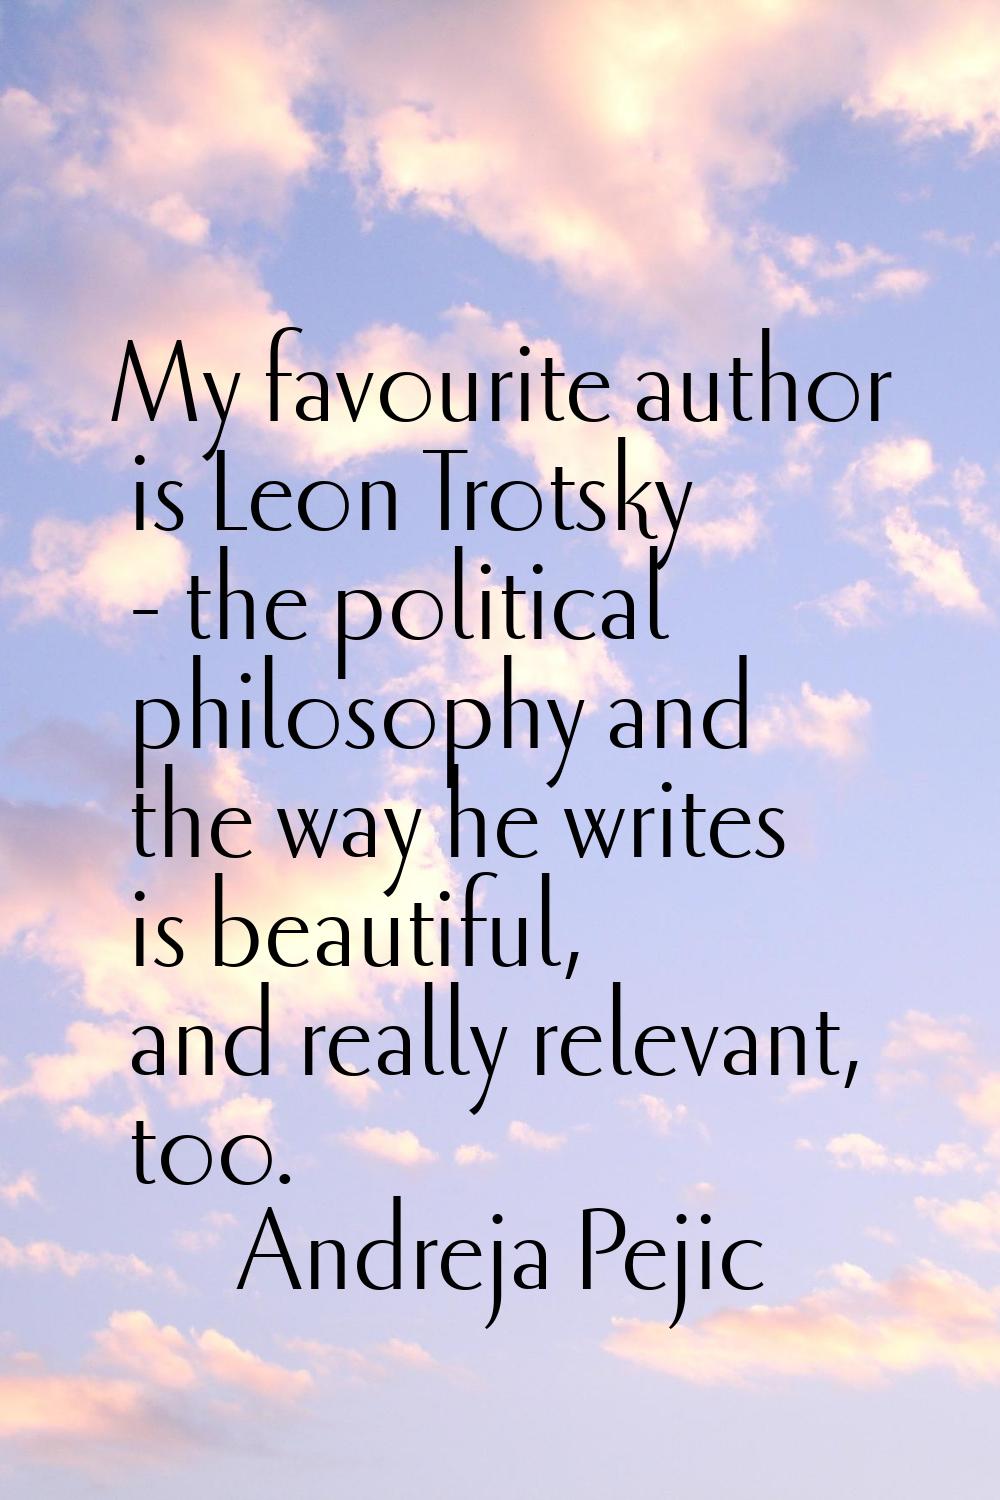 My favourite author is Leon Trotsky - the political philosophy and the way he writes is beautiful, 